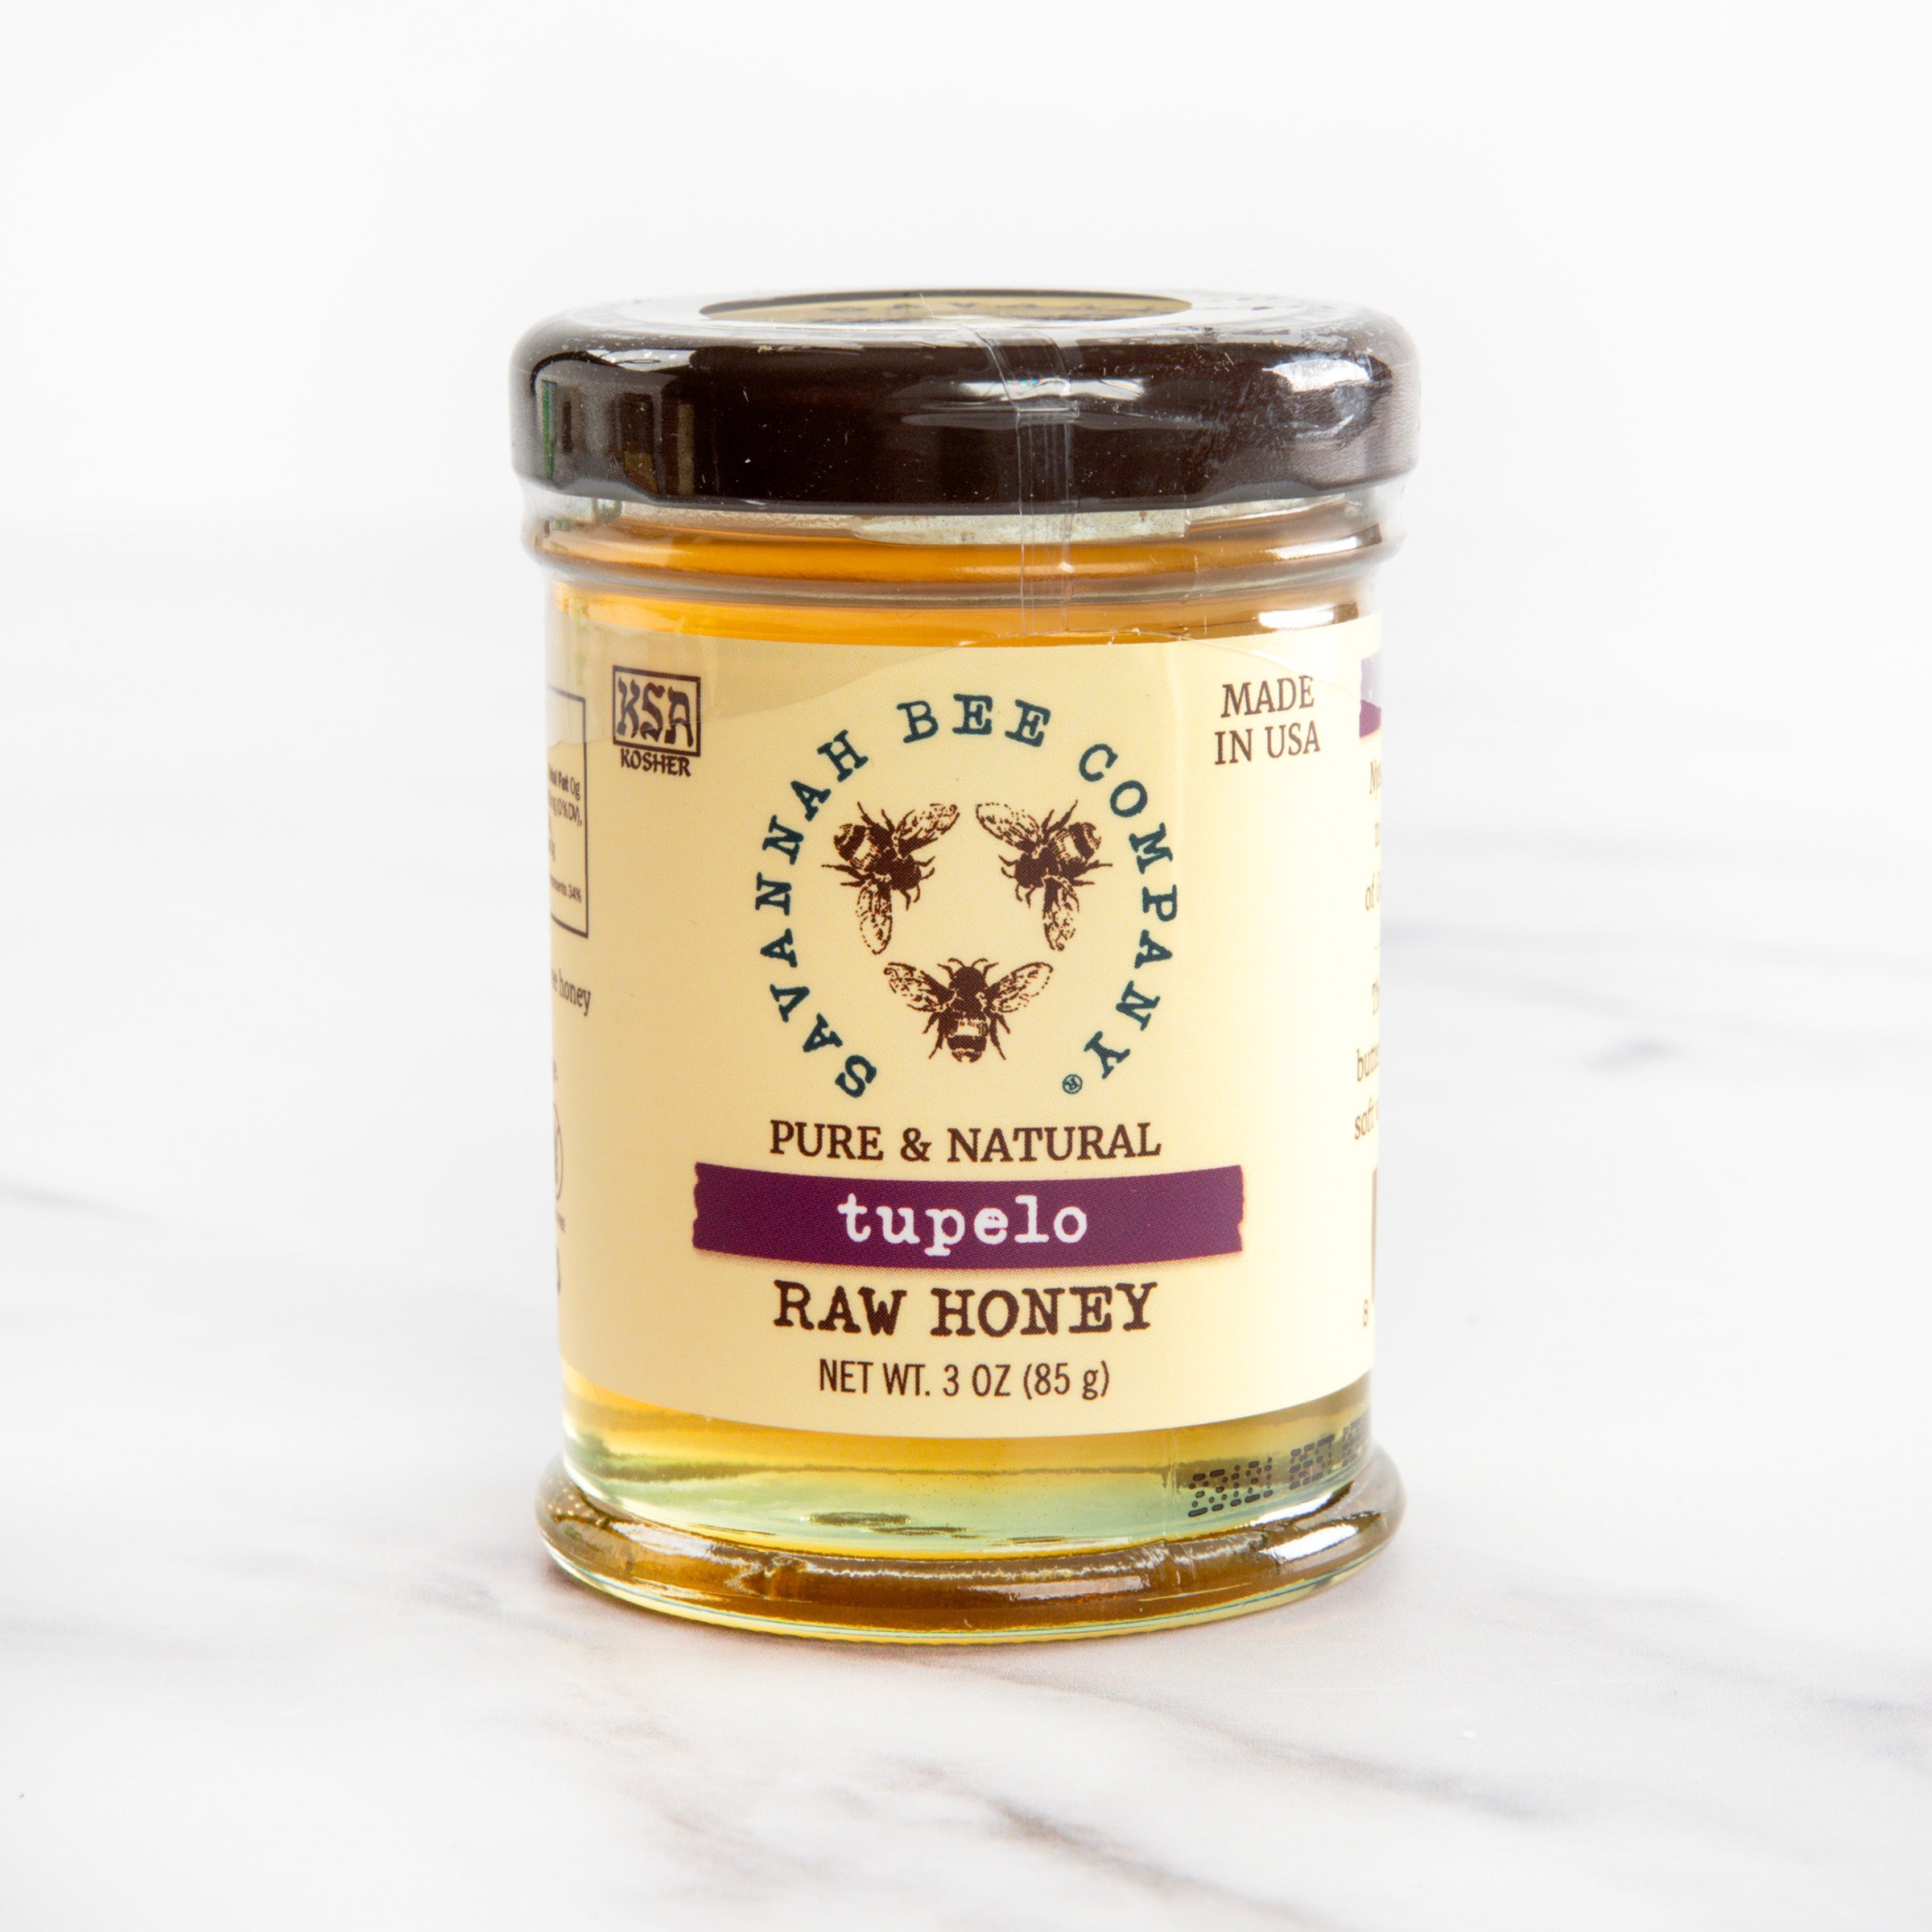 What Is Tupelo Honey - And What Makes It Special?